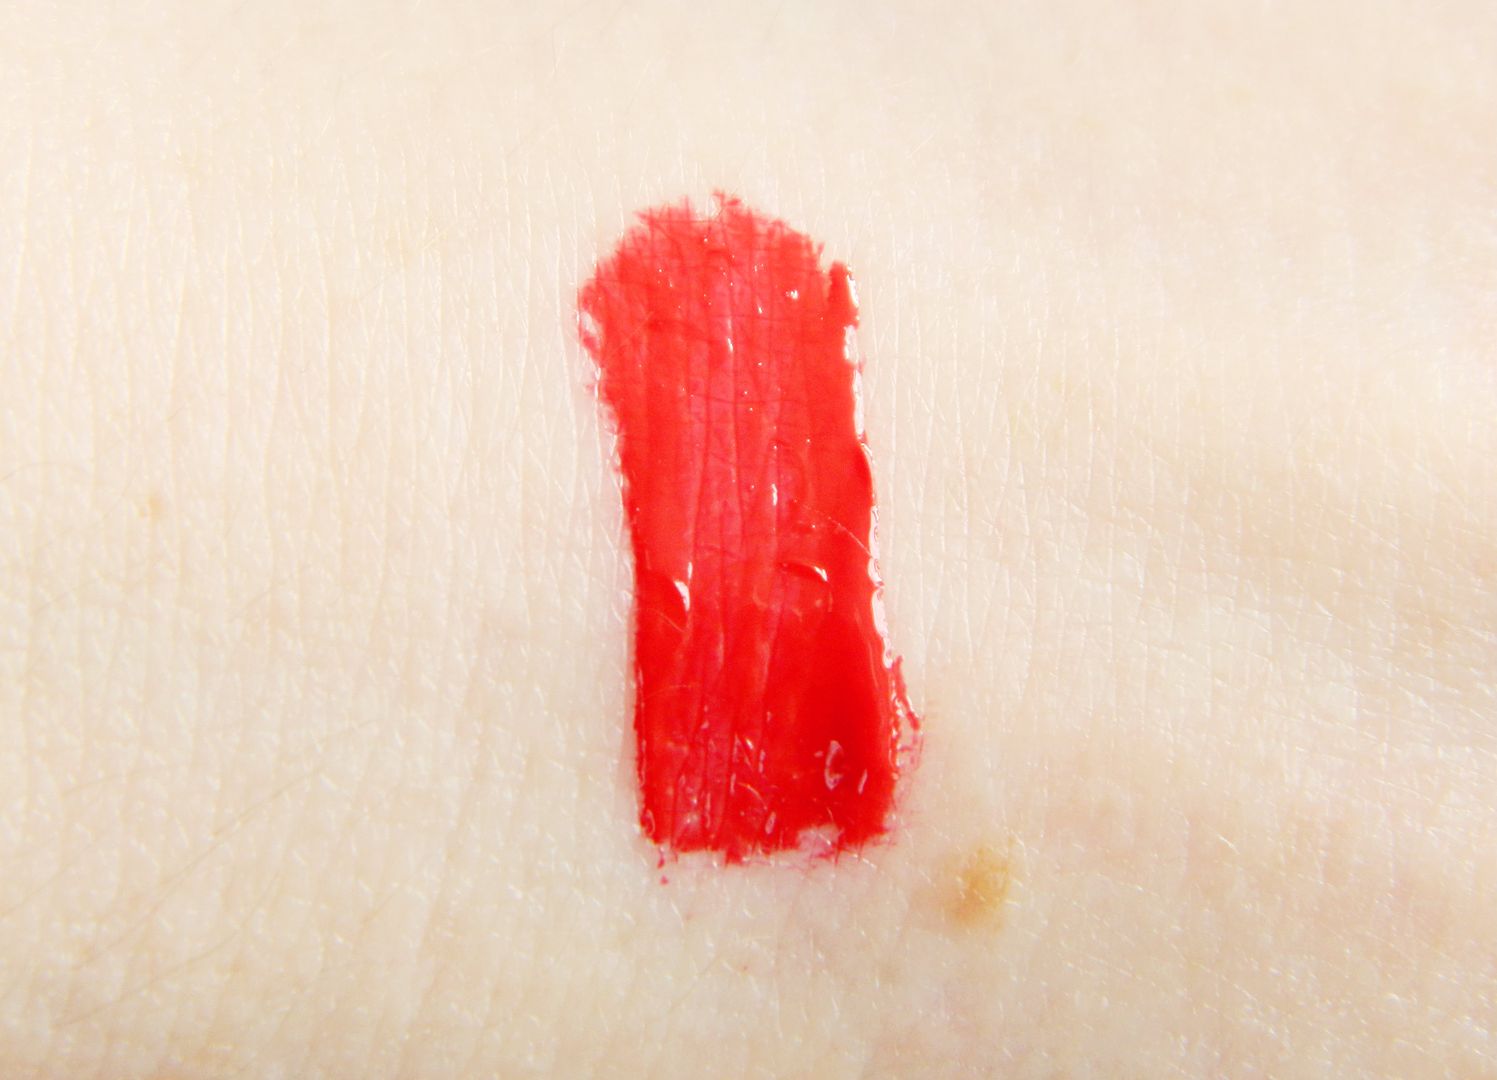 Soap & Glory Sexy Mother Pucker Lip Shine Lacquer In Riot Review Swatch On Skin Belle-amie UK Beauty Fashion Lifestyle Blog